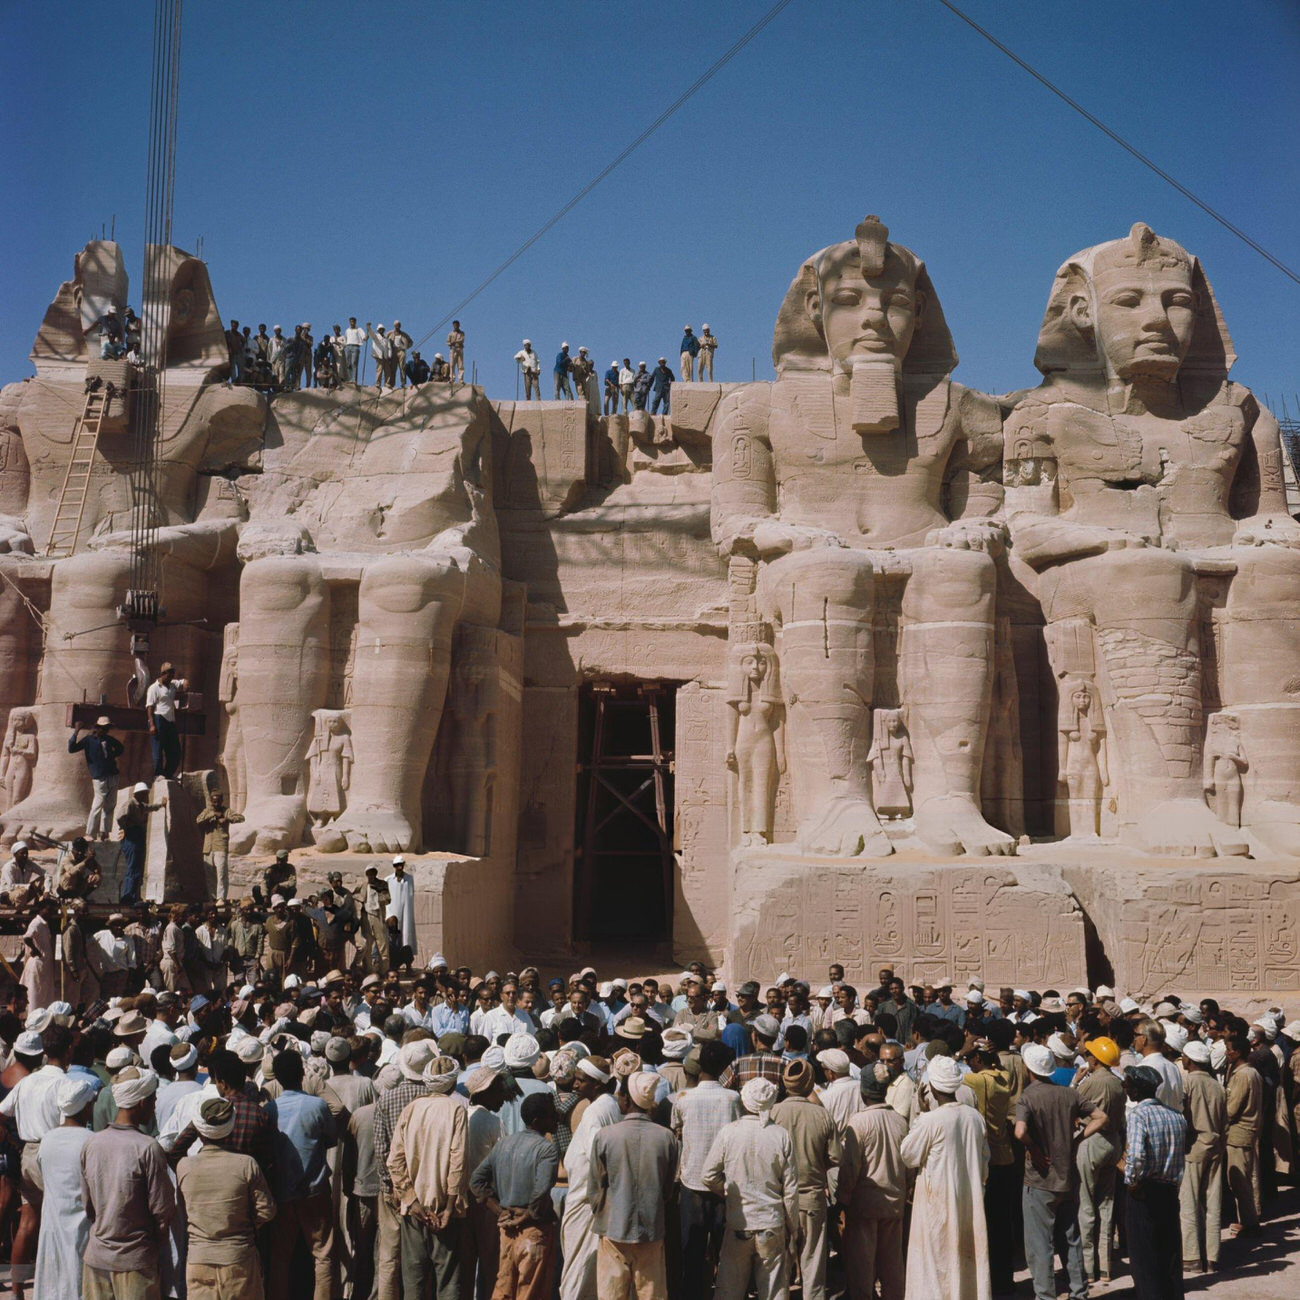 Workers in front of Pharaoh Ramesses II's statues at Abu Simbel during the 1967 reassembly after relocation to avoid Nile flooding from the Aswan High Dam.